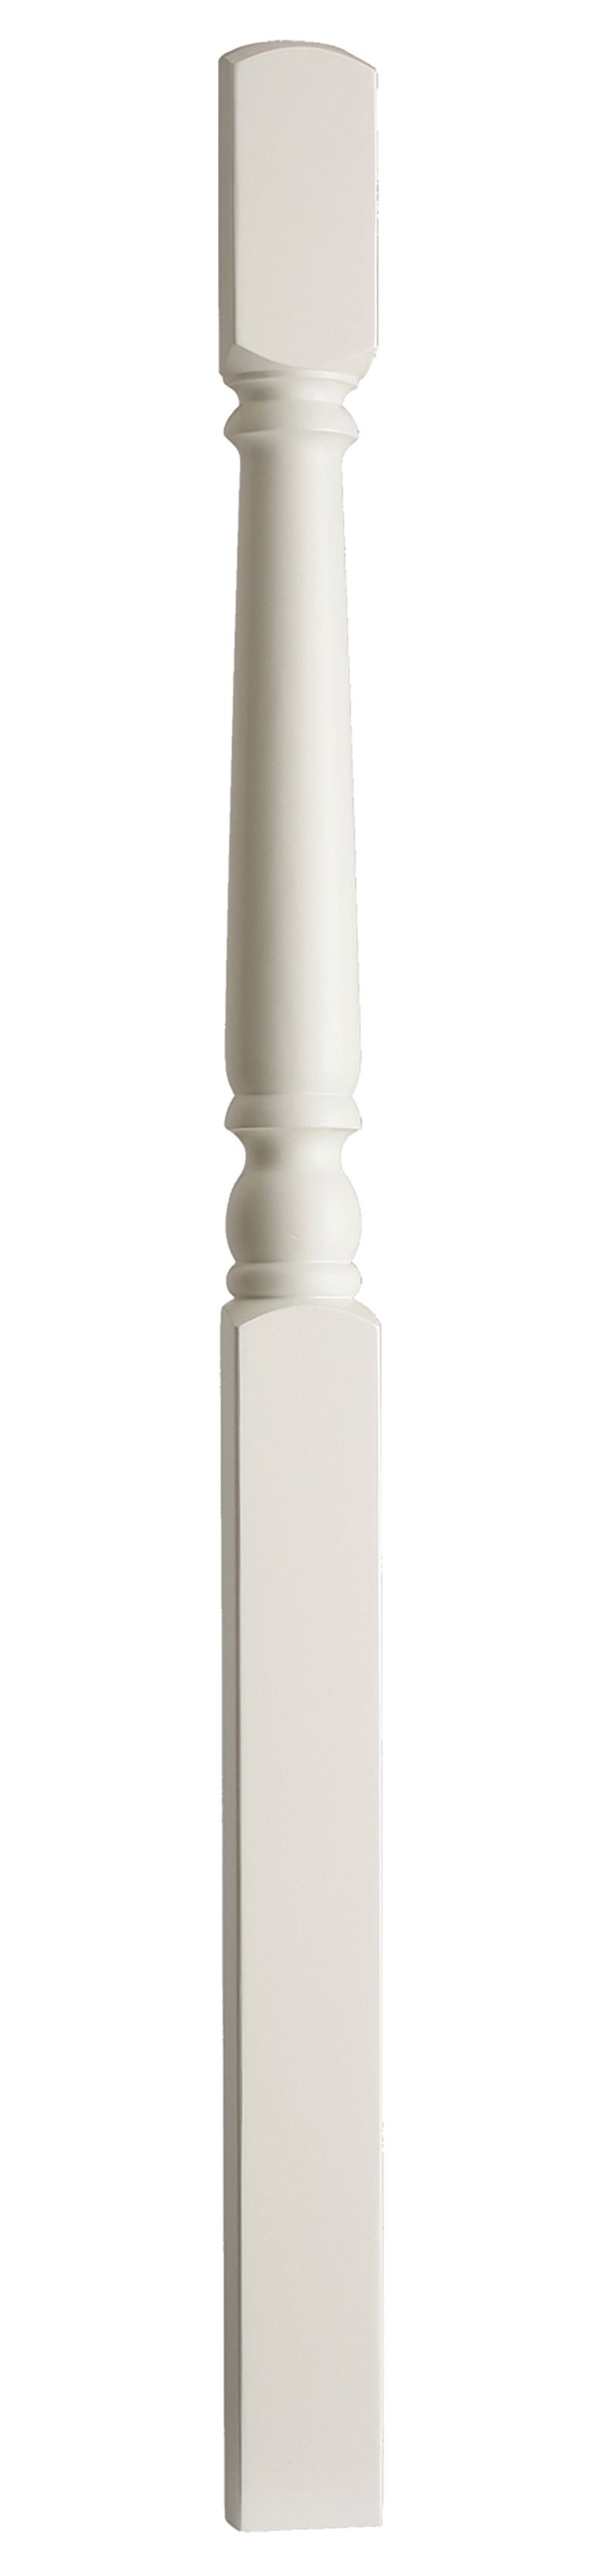 Image of Wickes Primed Turned Newel 1500 x 90 x 41mm